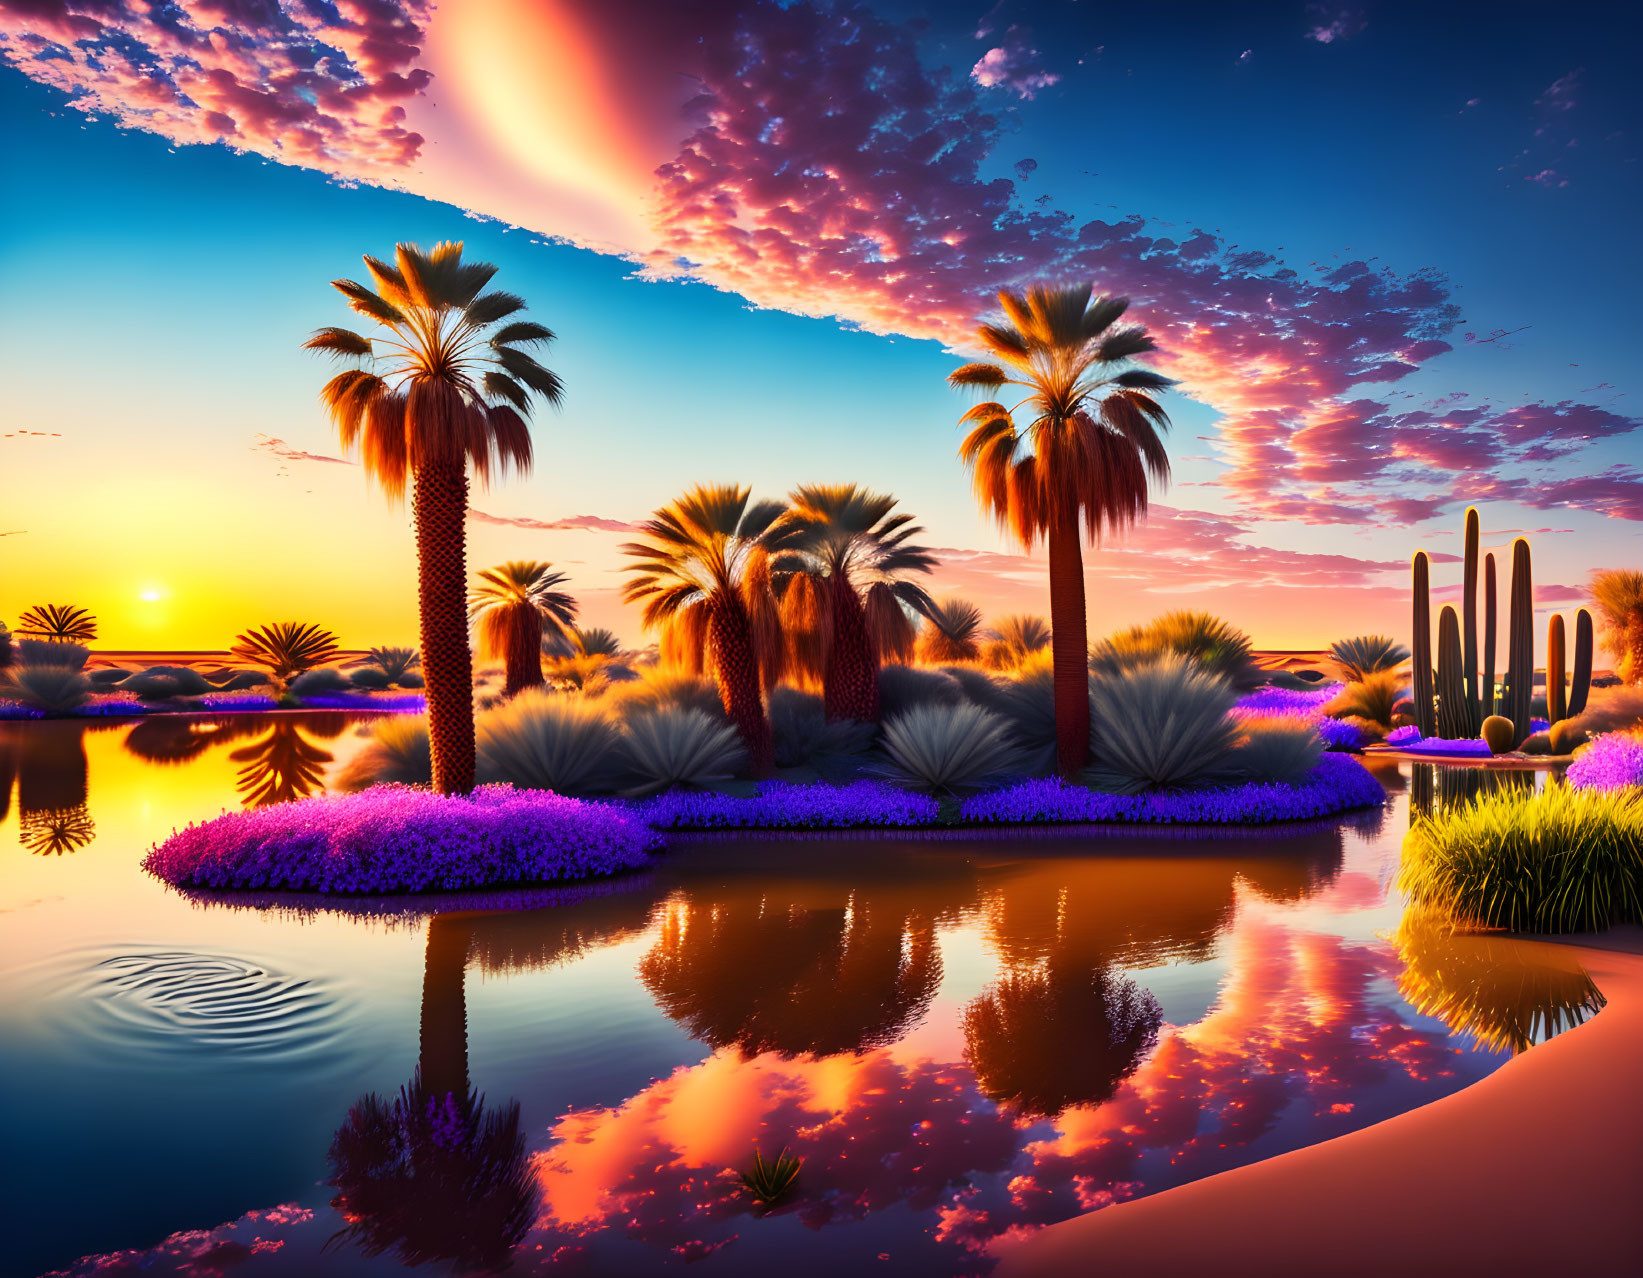 Colorful sunset over desert oasis with palm trees, cacti, and calm waters.